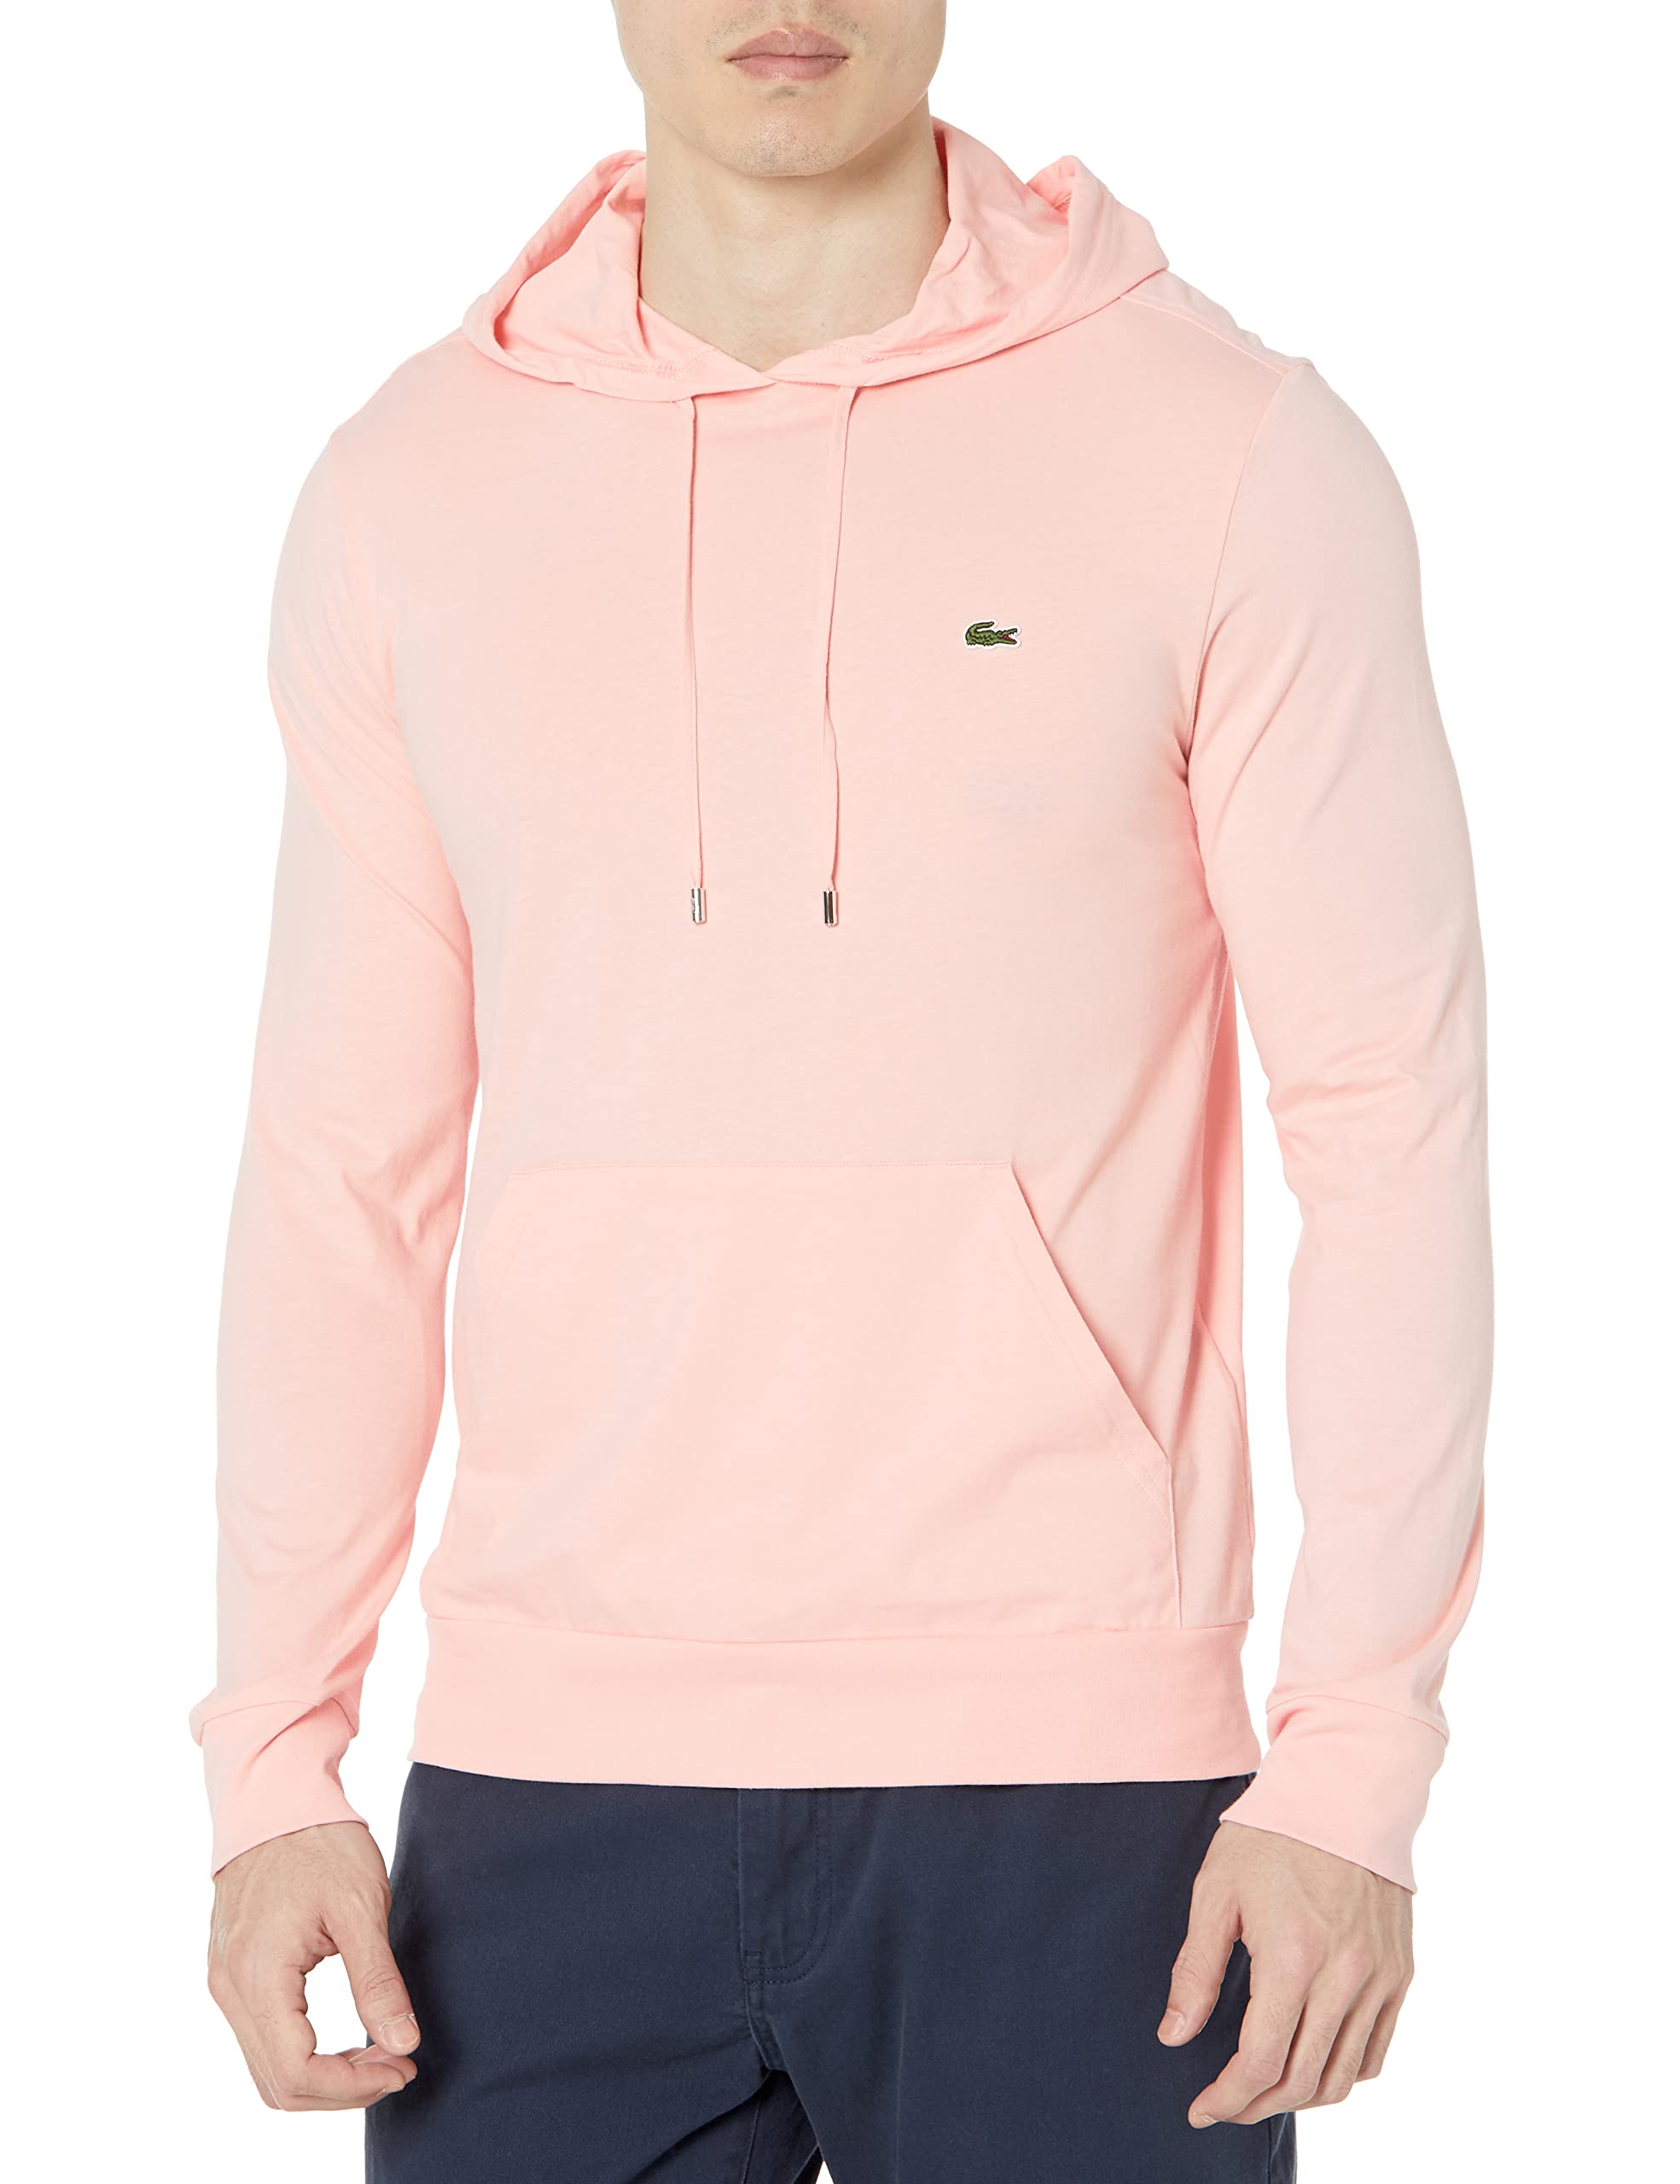 Lacoste Men's Long Sleeve Hooded Jersey Cotton (Waterlily) $35.20 Free Shipping